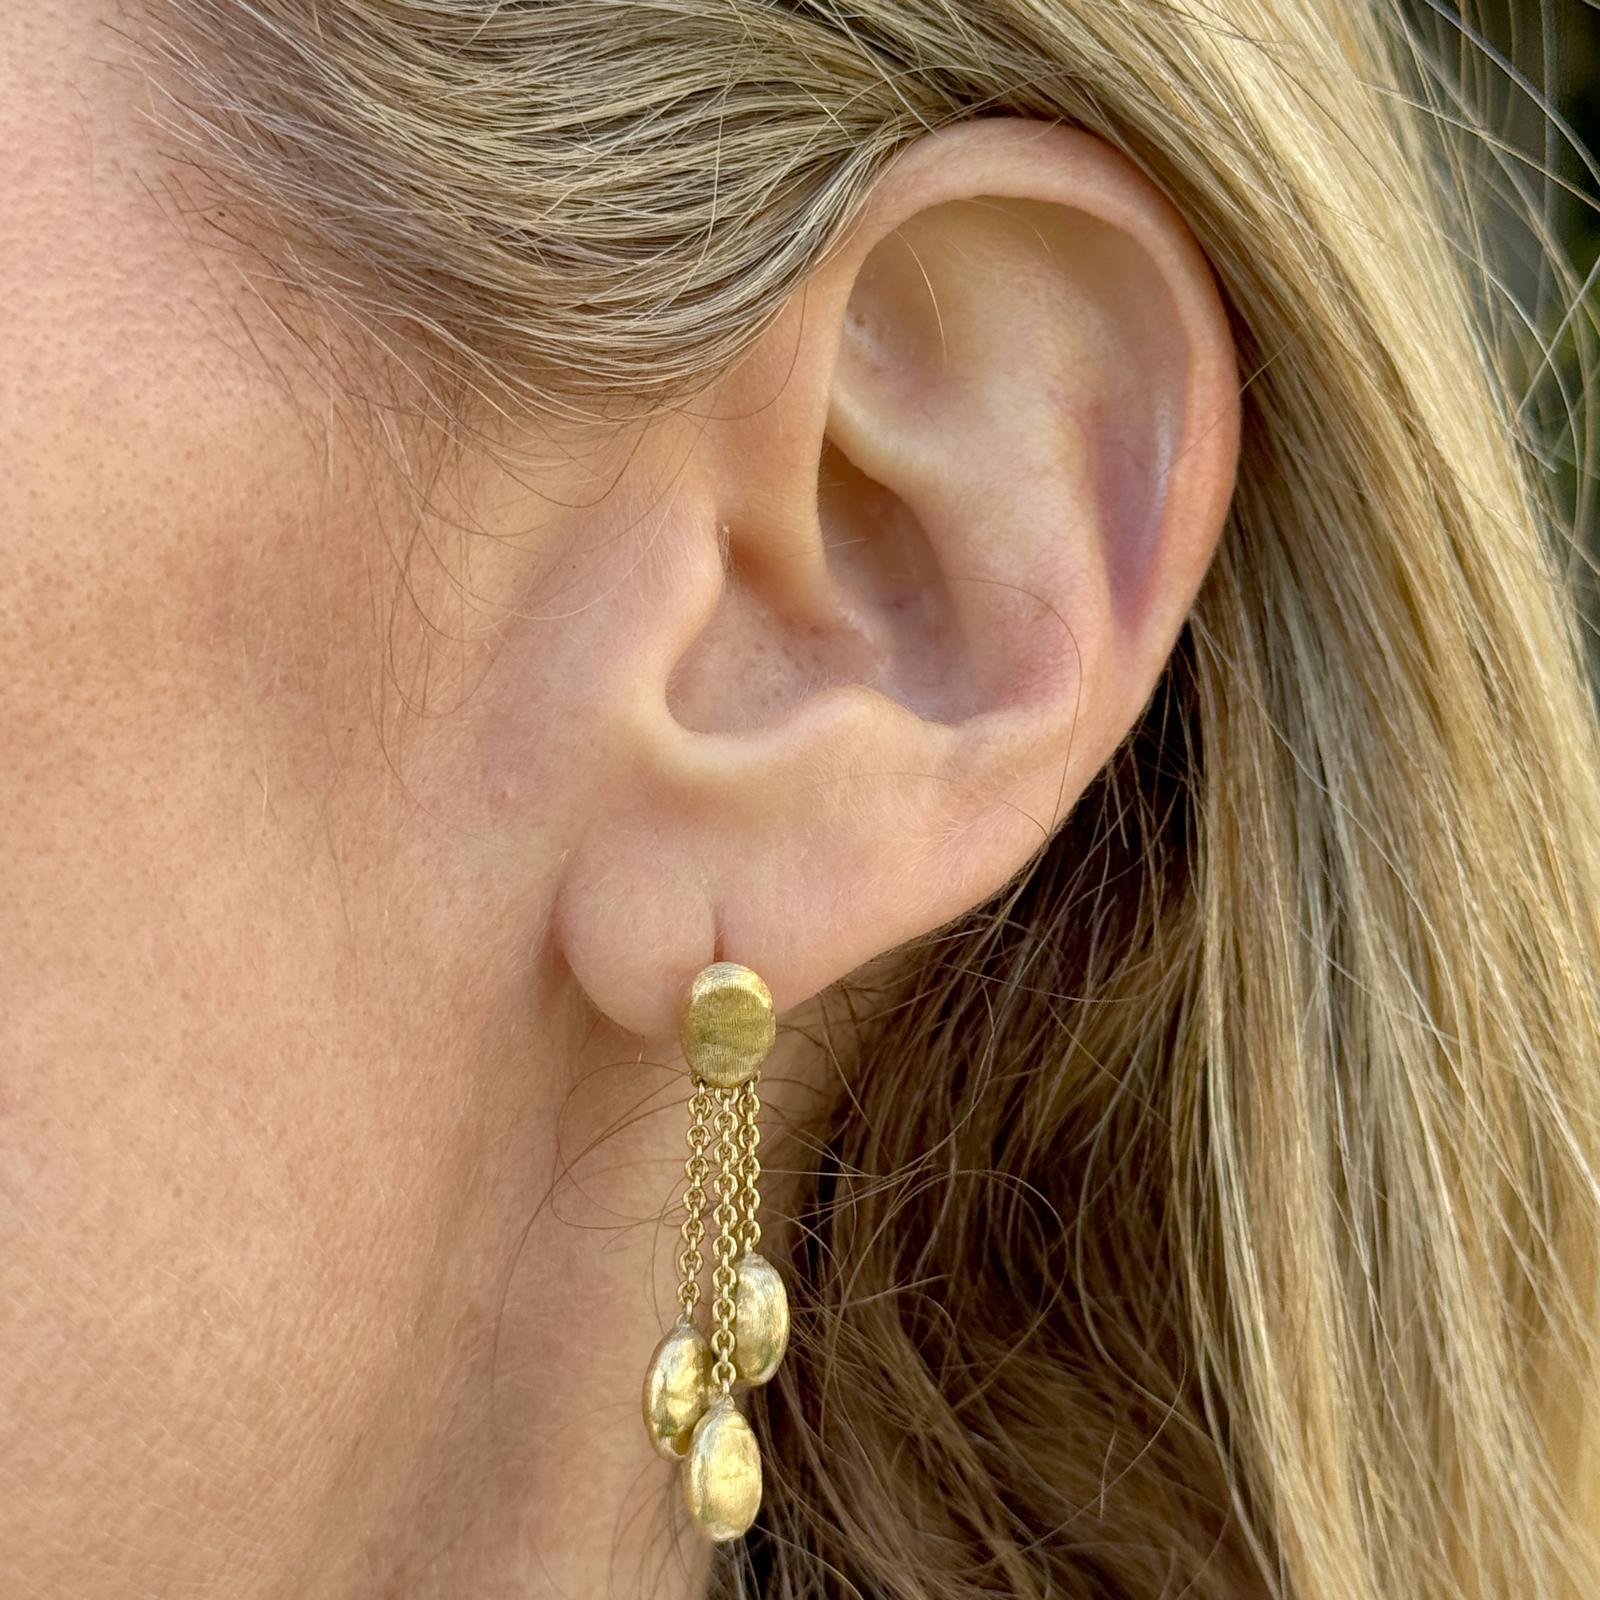 Marco Bicego Siviglia dangle earrings crafted in 18 karat yellow gold. The drop earrings measure 1.25 inches in length. Backs are 18 karat gold but not original to the earrings. Weight: 4.5 grams.